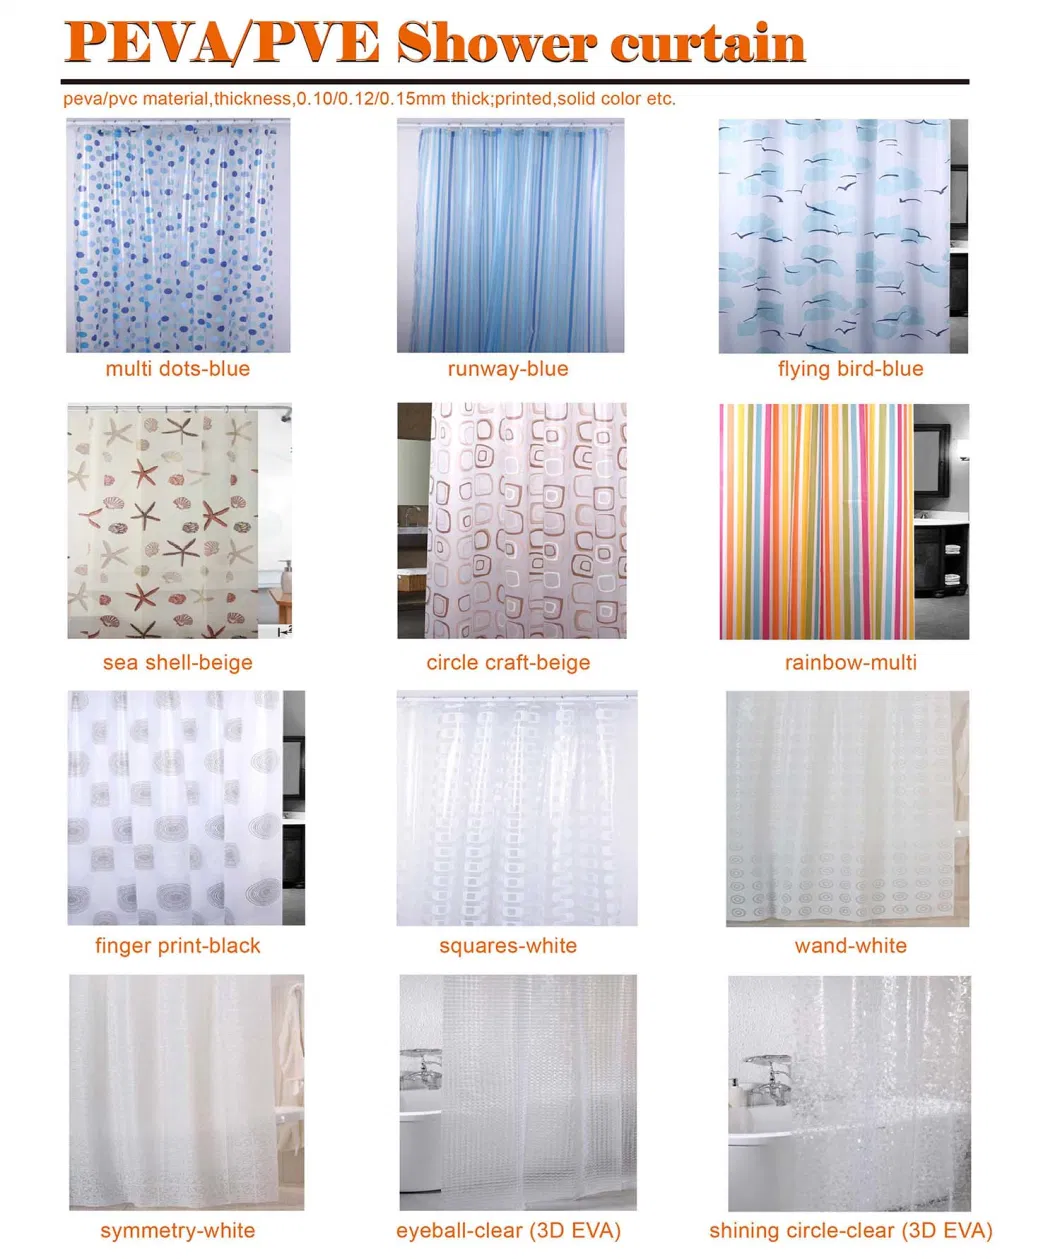 Customized Bathroom Plastic Shower Curtain with Three Color Stripe